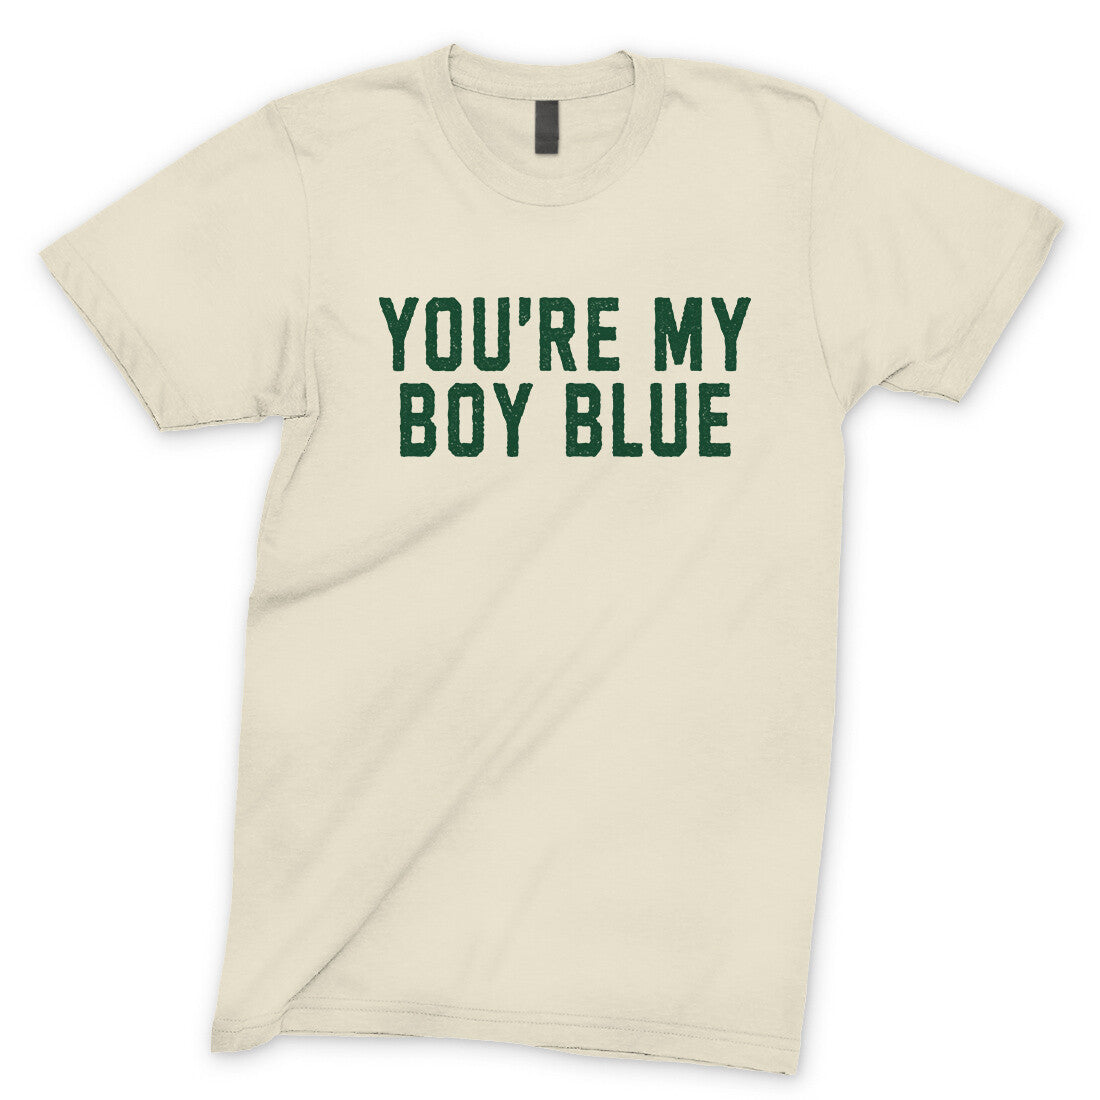 You're my Boy Blue in Natural Color